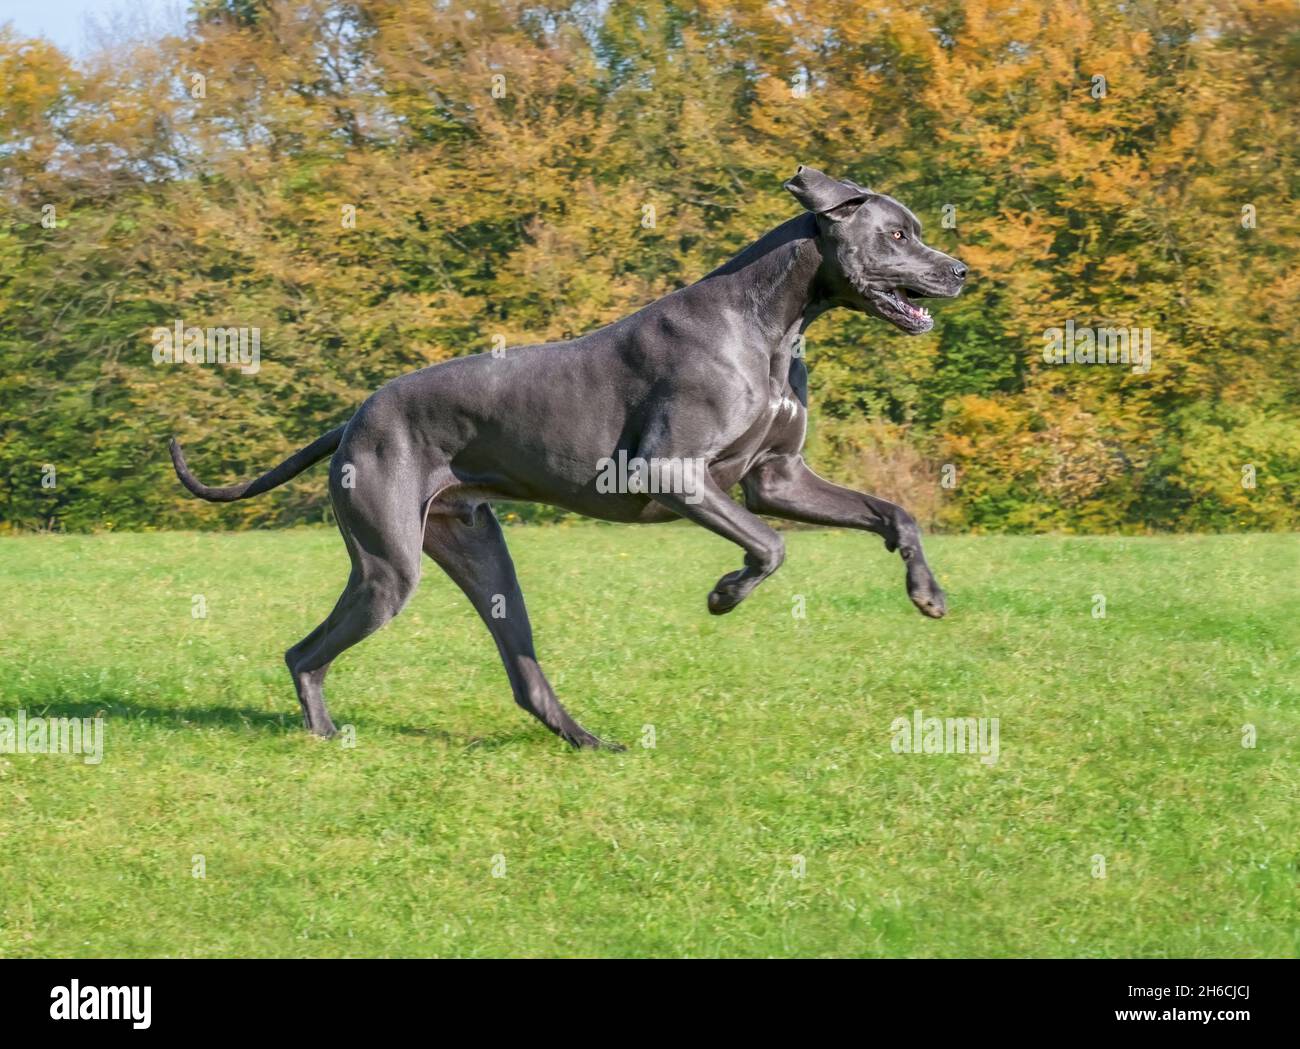 Blue Great Dane, one of the largest dog breeds, male, running playfully and powerfully across a green grass meadow with colourful trees in autumn Stock Photo